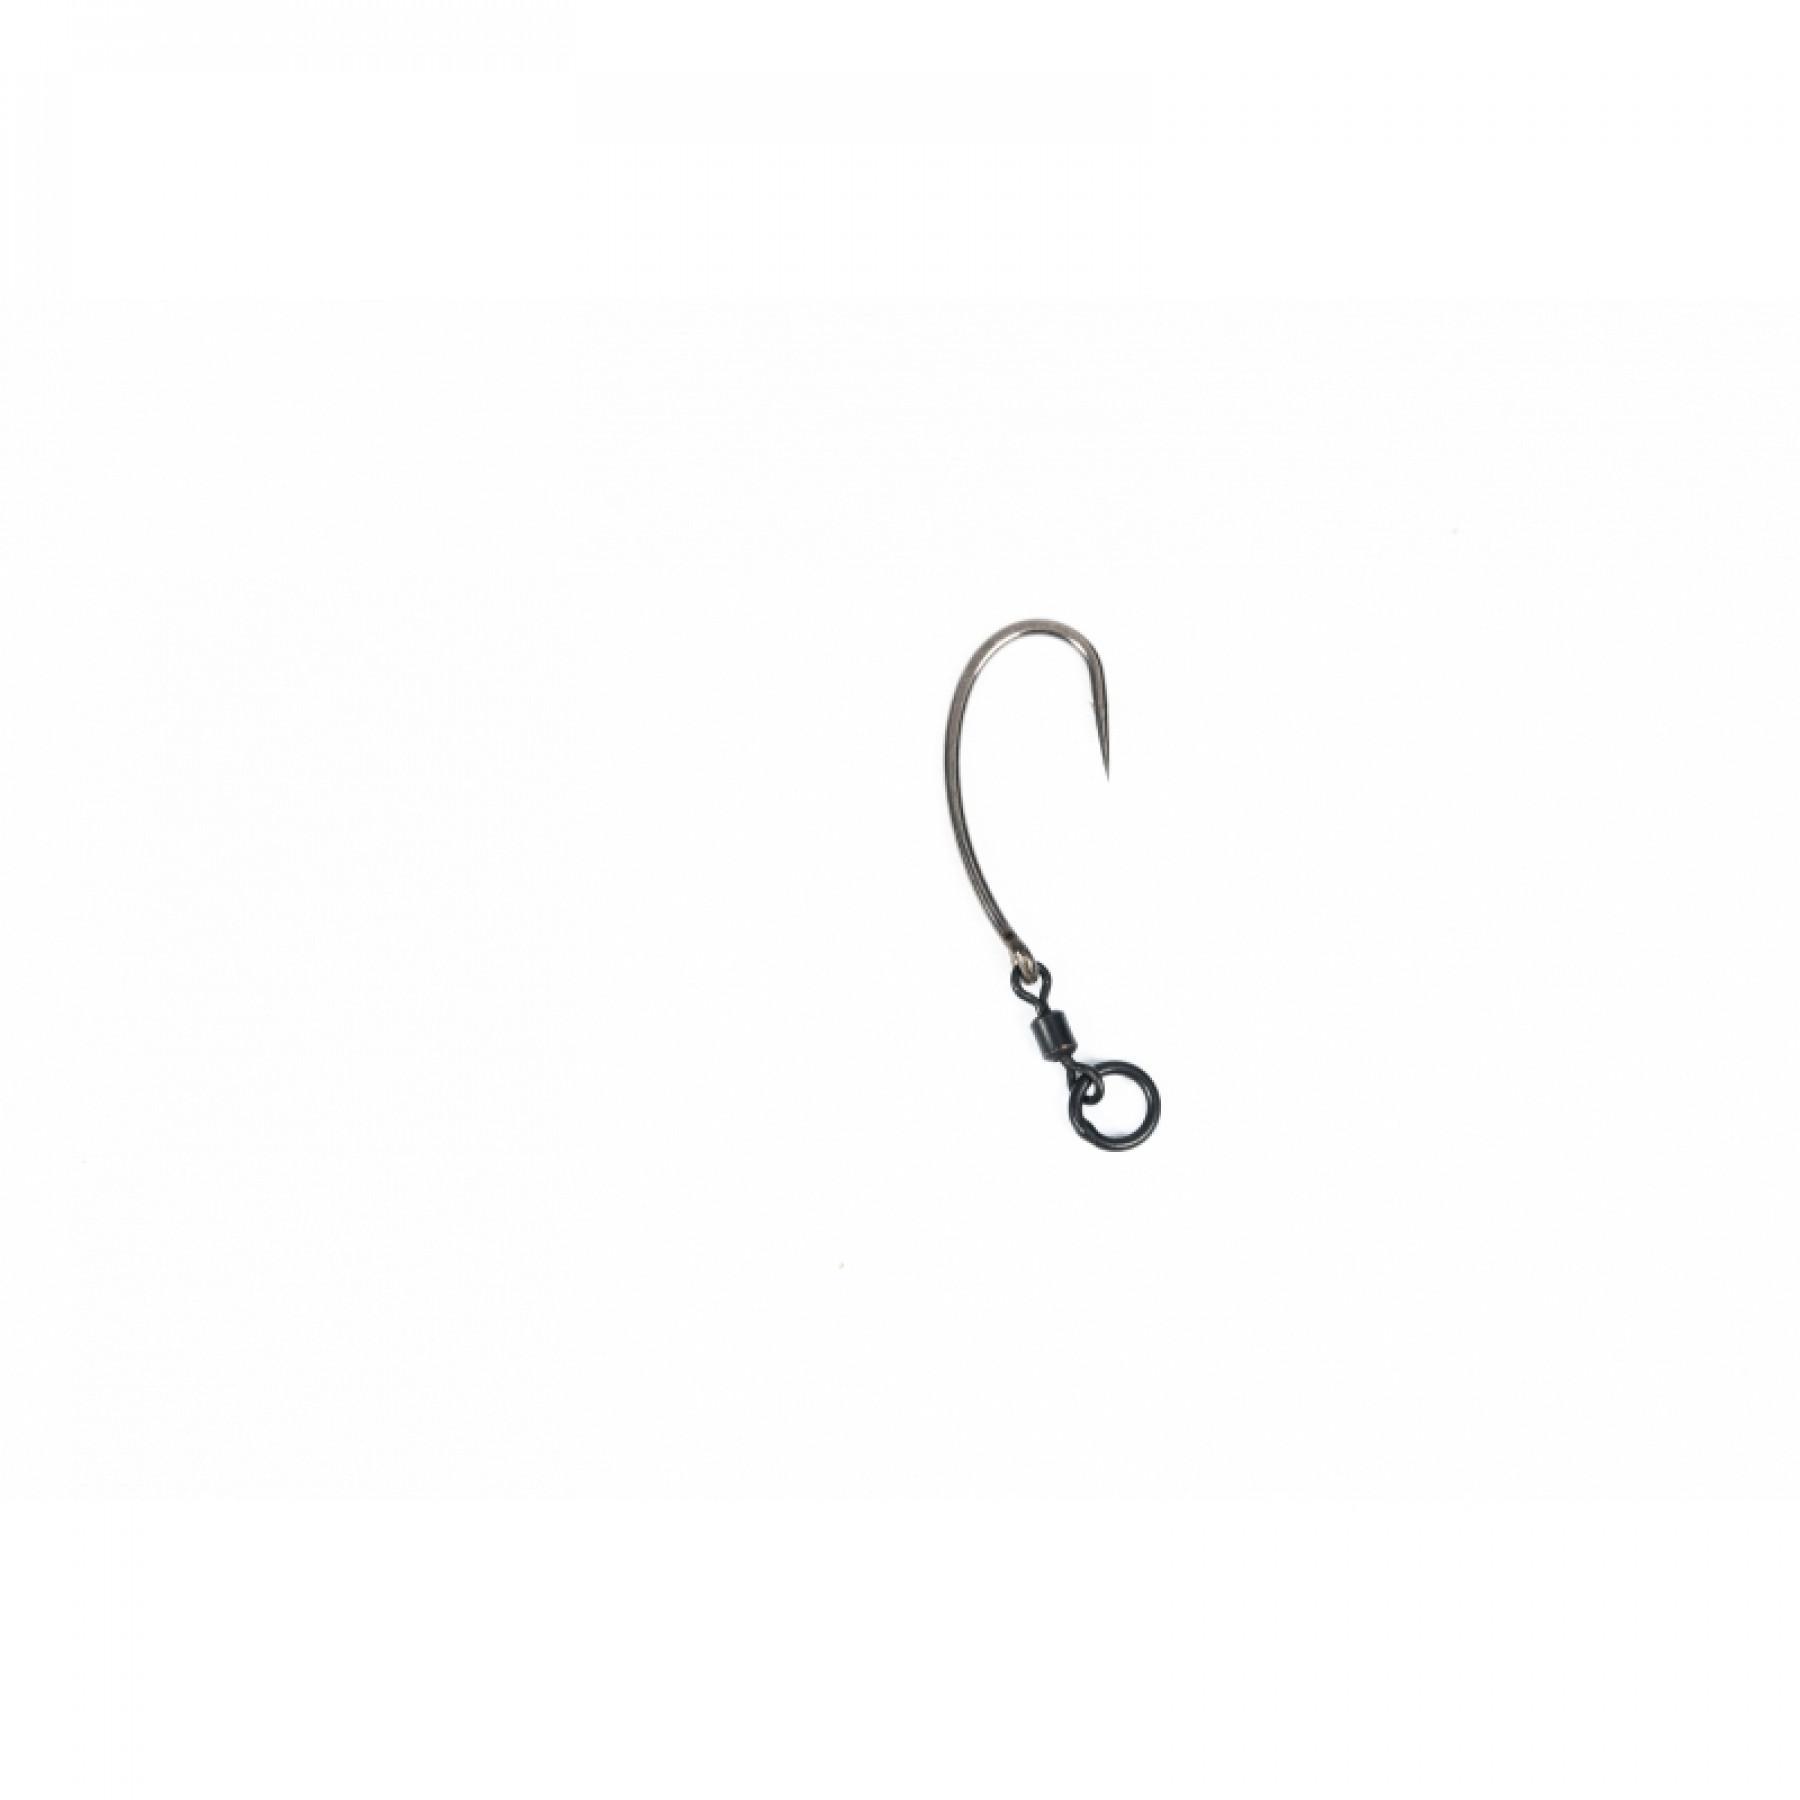 Hook Pinpoint Fang Gyro size 4 Micro Barbed